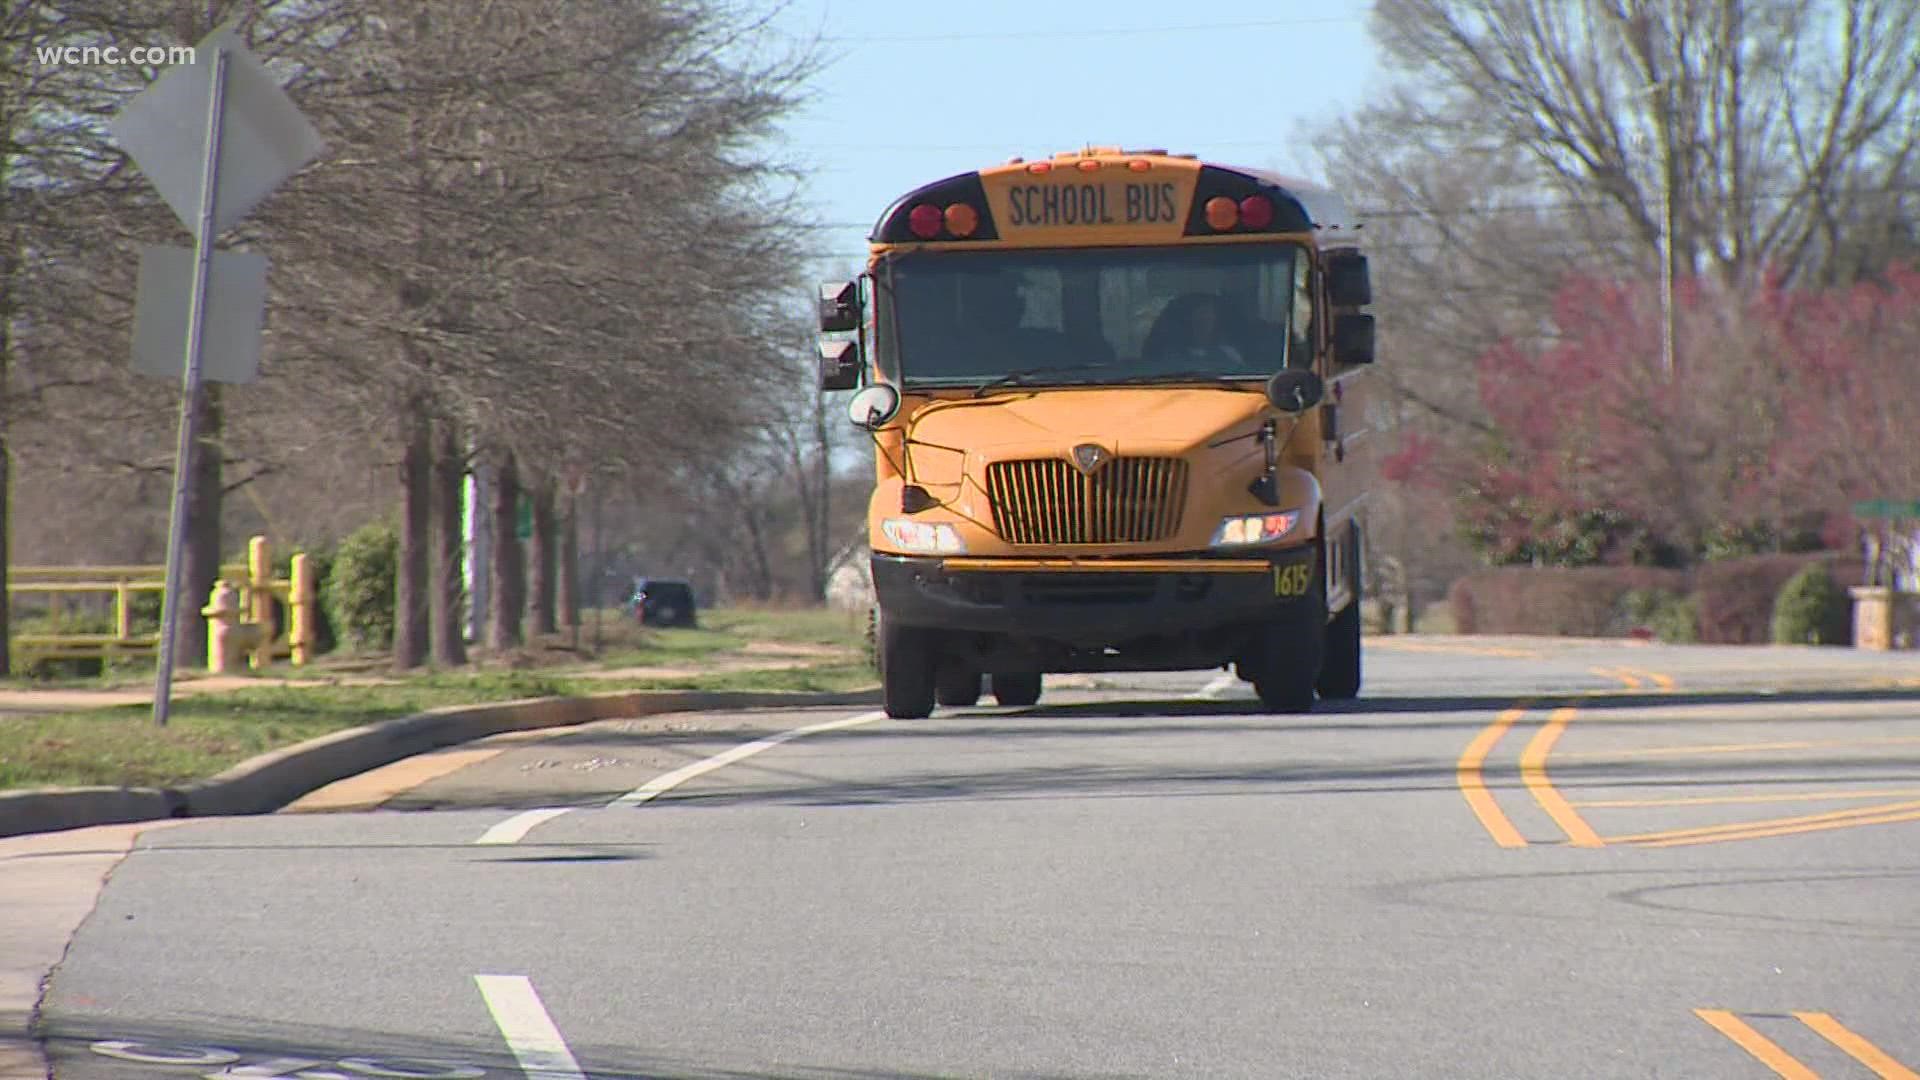 CMS Transportation Director Adam Johnson says the district's recent decision to increase starting pay for bus drivers has helped cut into the shortage.